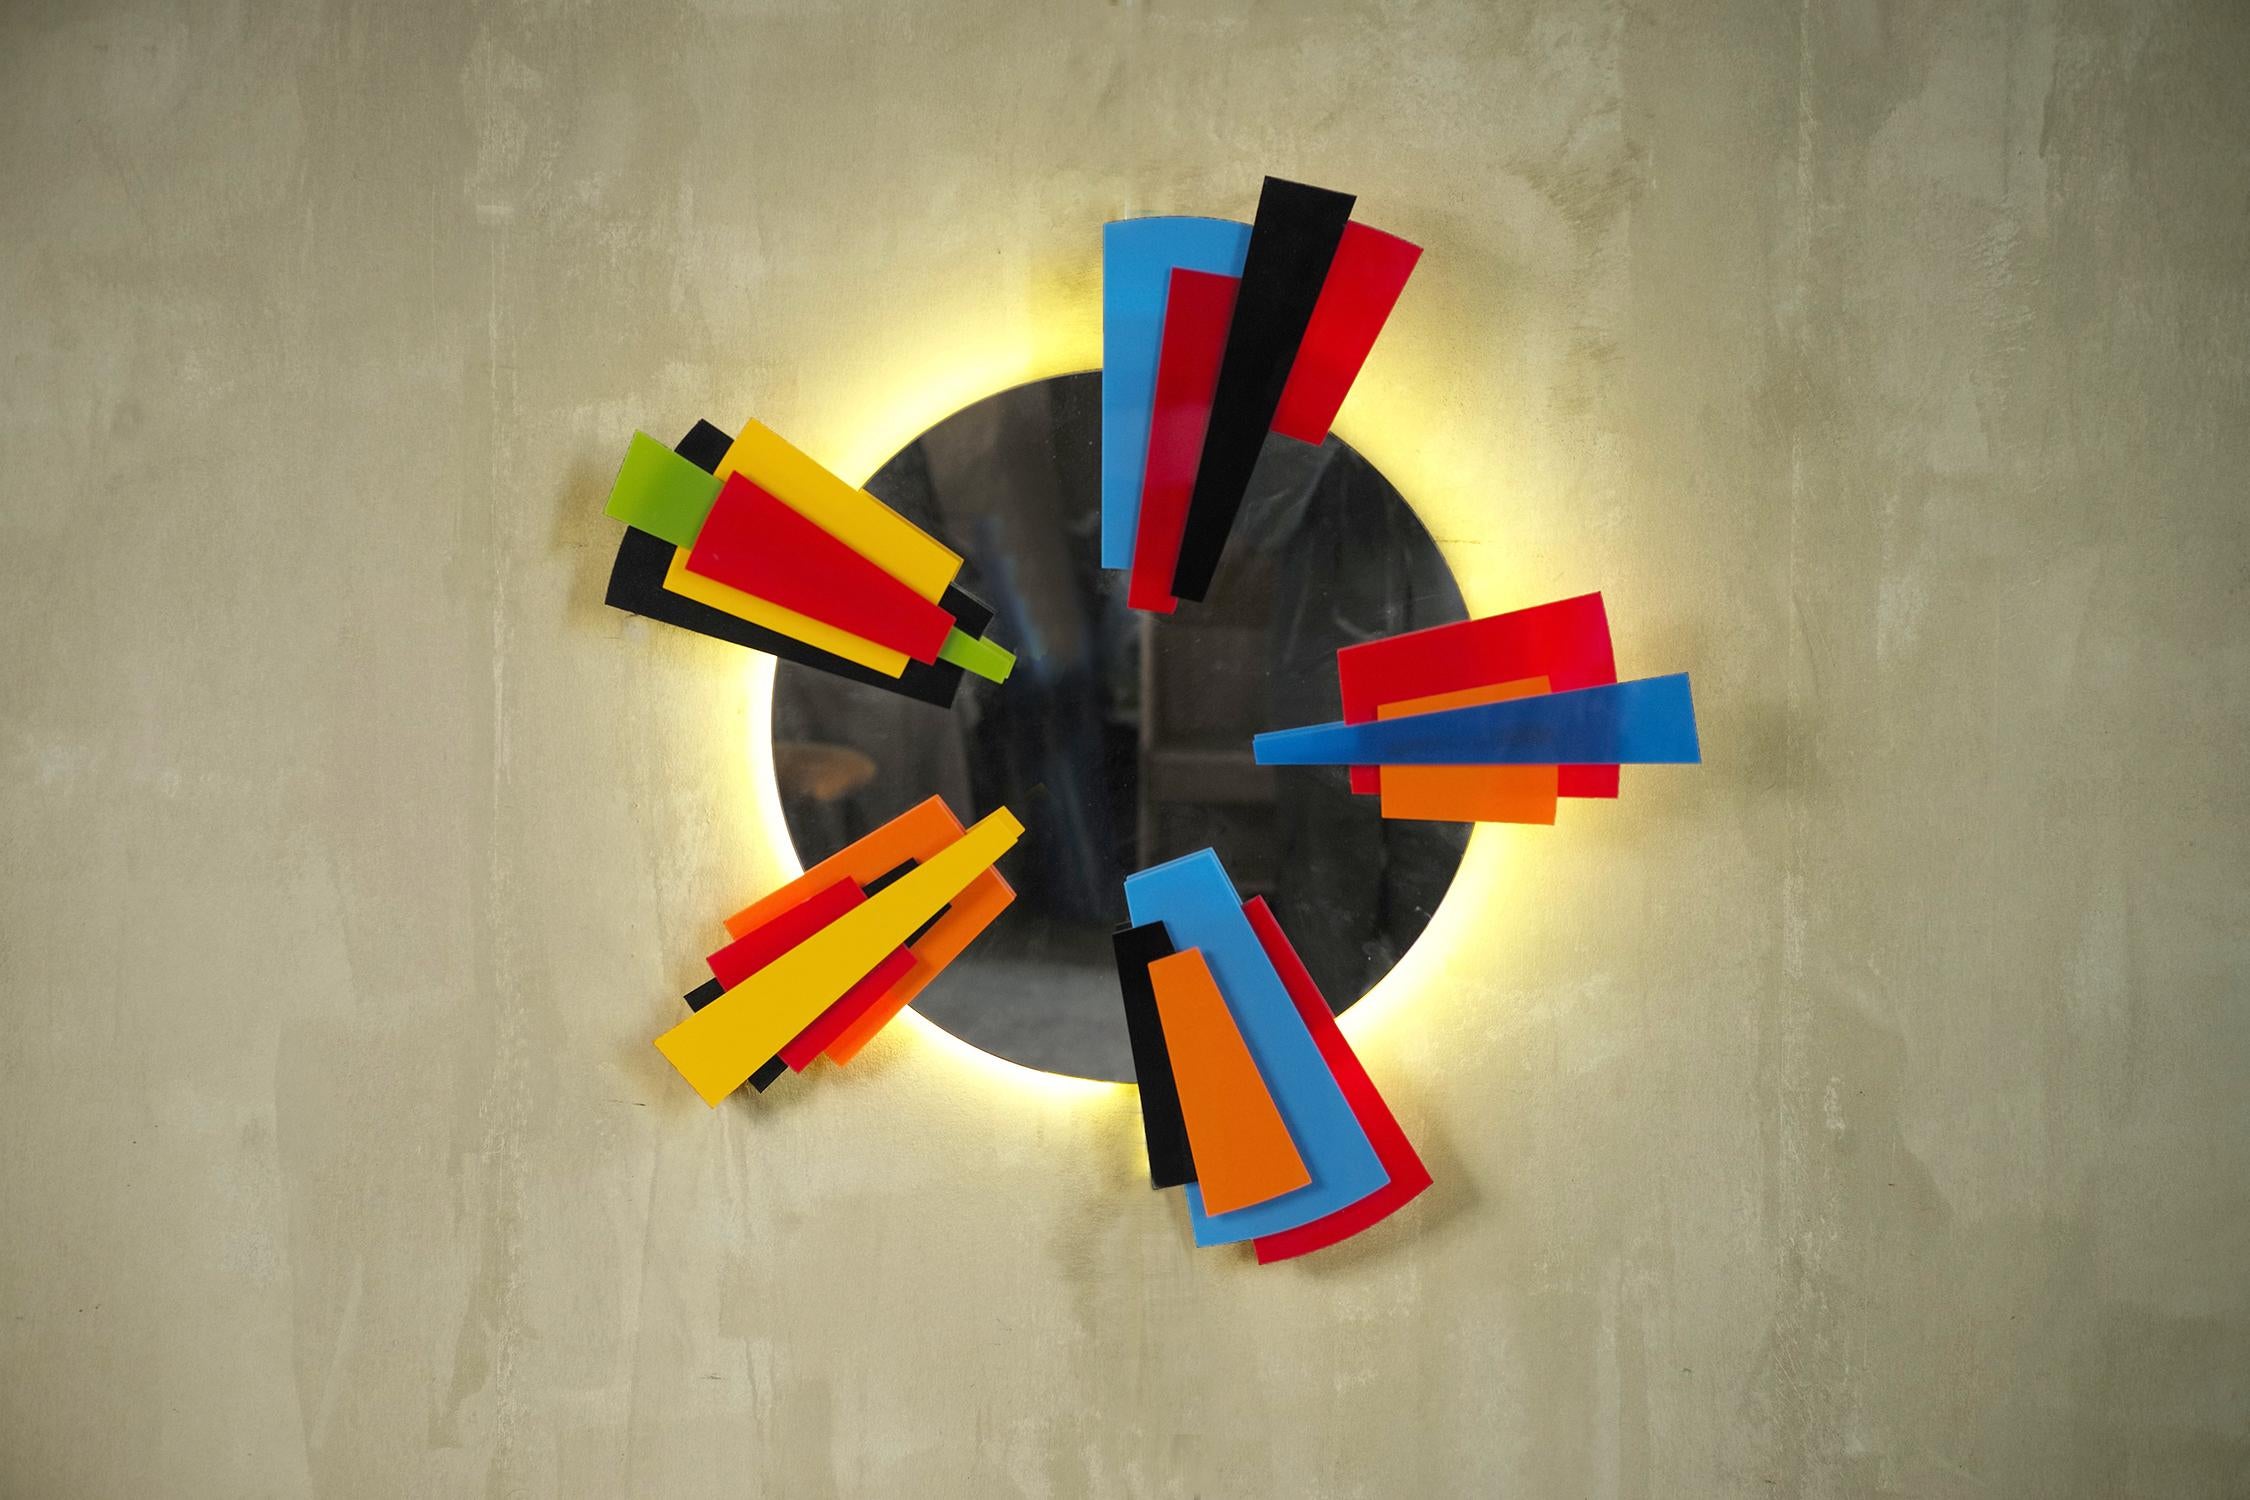 Backlit circular mirror, France 2000. Pieces of colored plexiglass are superimposed and arranged in a star. A white LED lighting system is installed at the rear. This creation is part of a small series created by a visual artist in the 2000s, each